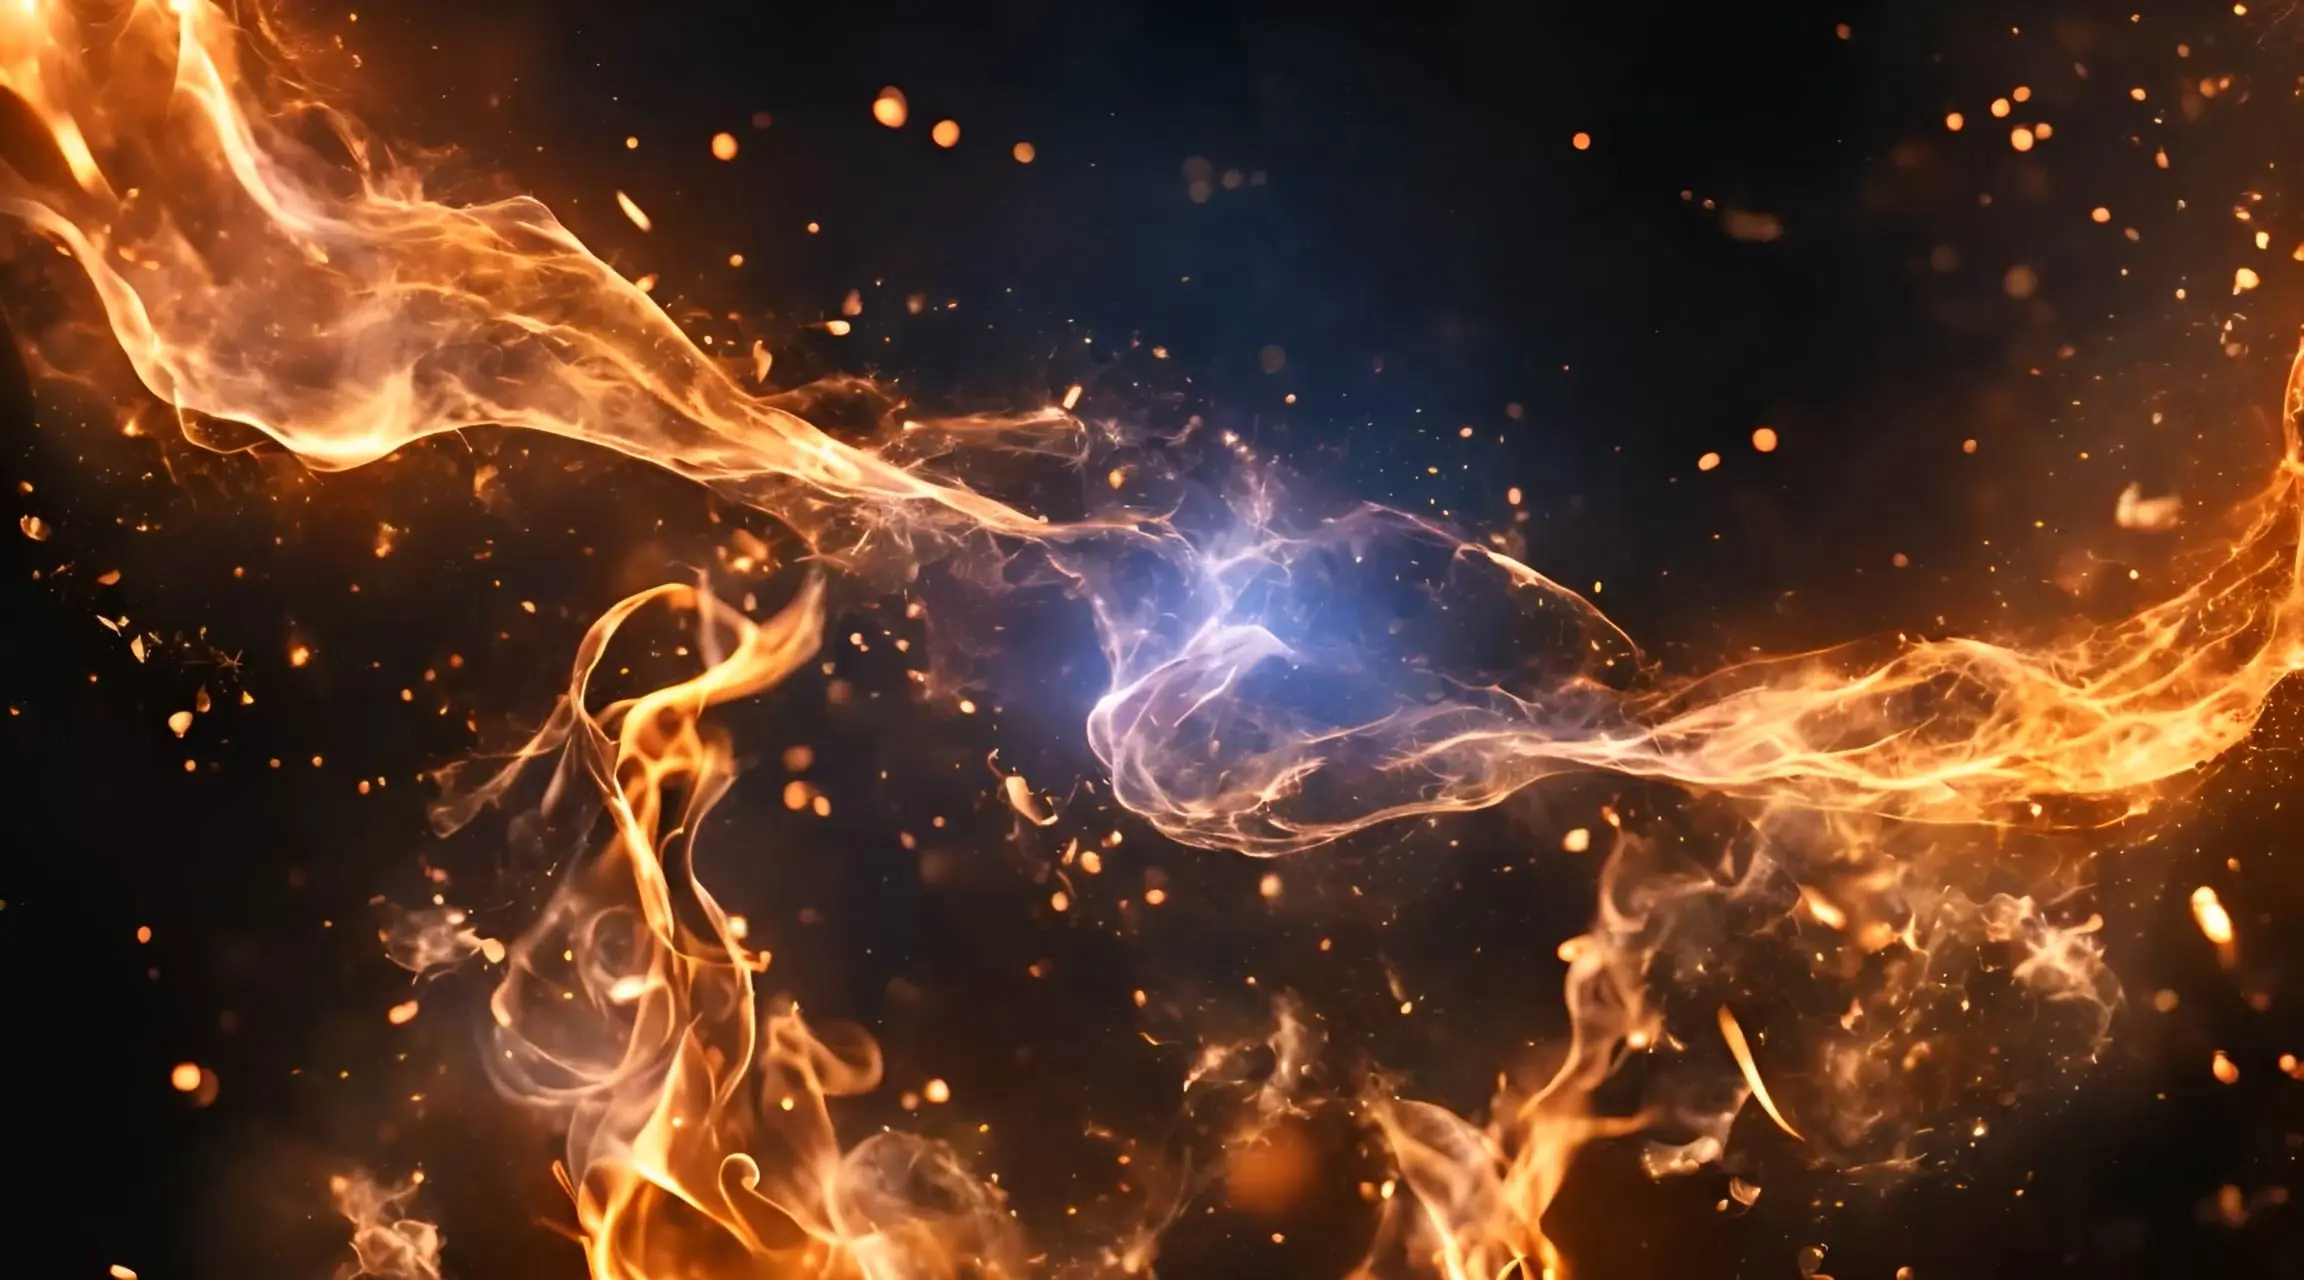 Flame and Electric Interaction Background